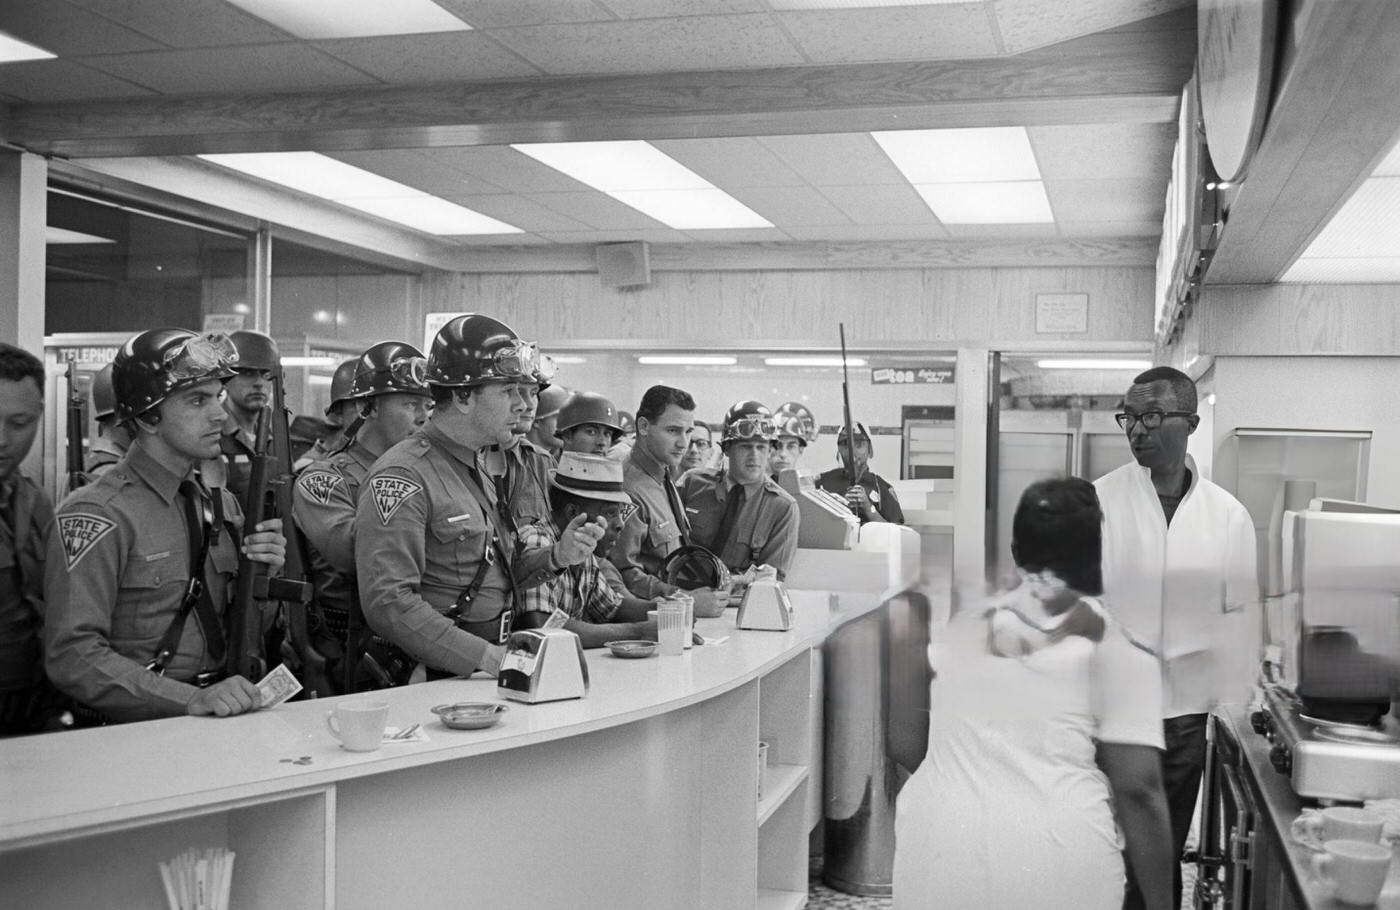 State Police officers in uniform and armed are at the counter in a cafeteria, among them an elderly African-American man